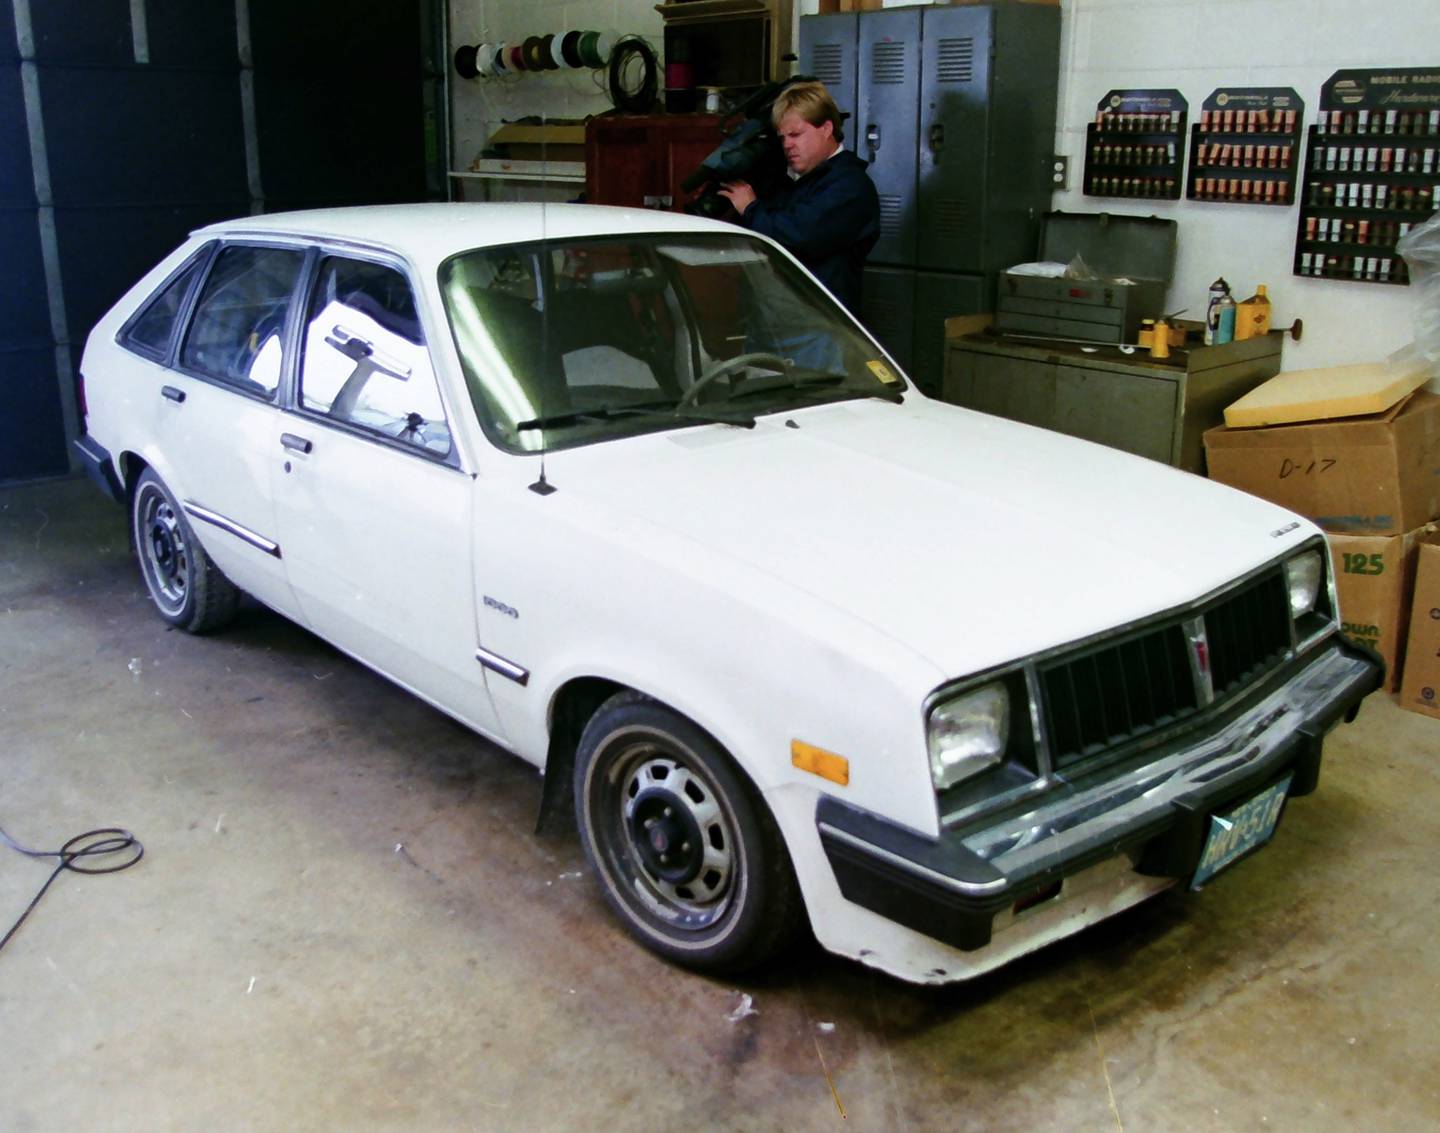 Tammy Zywicki's car is impounded in 1992 at the Illinois State Police Headquarters in La Salle.